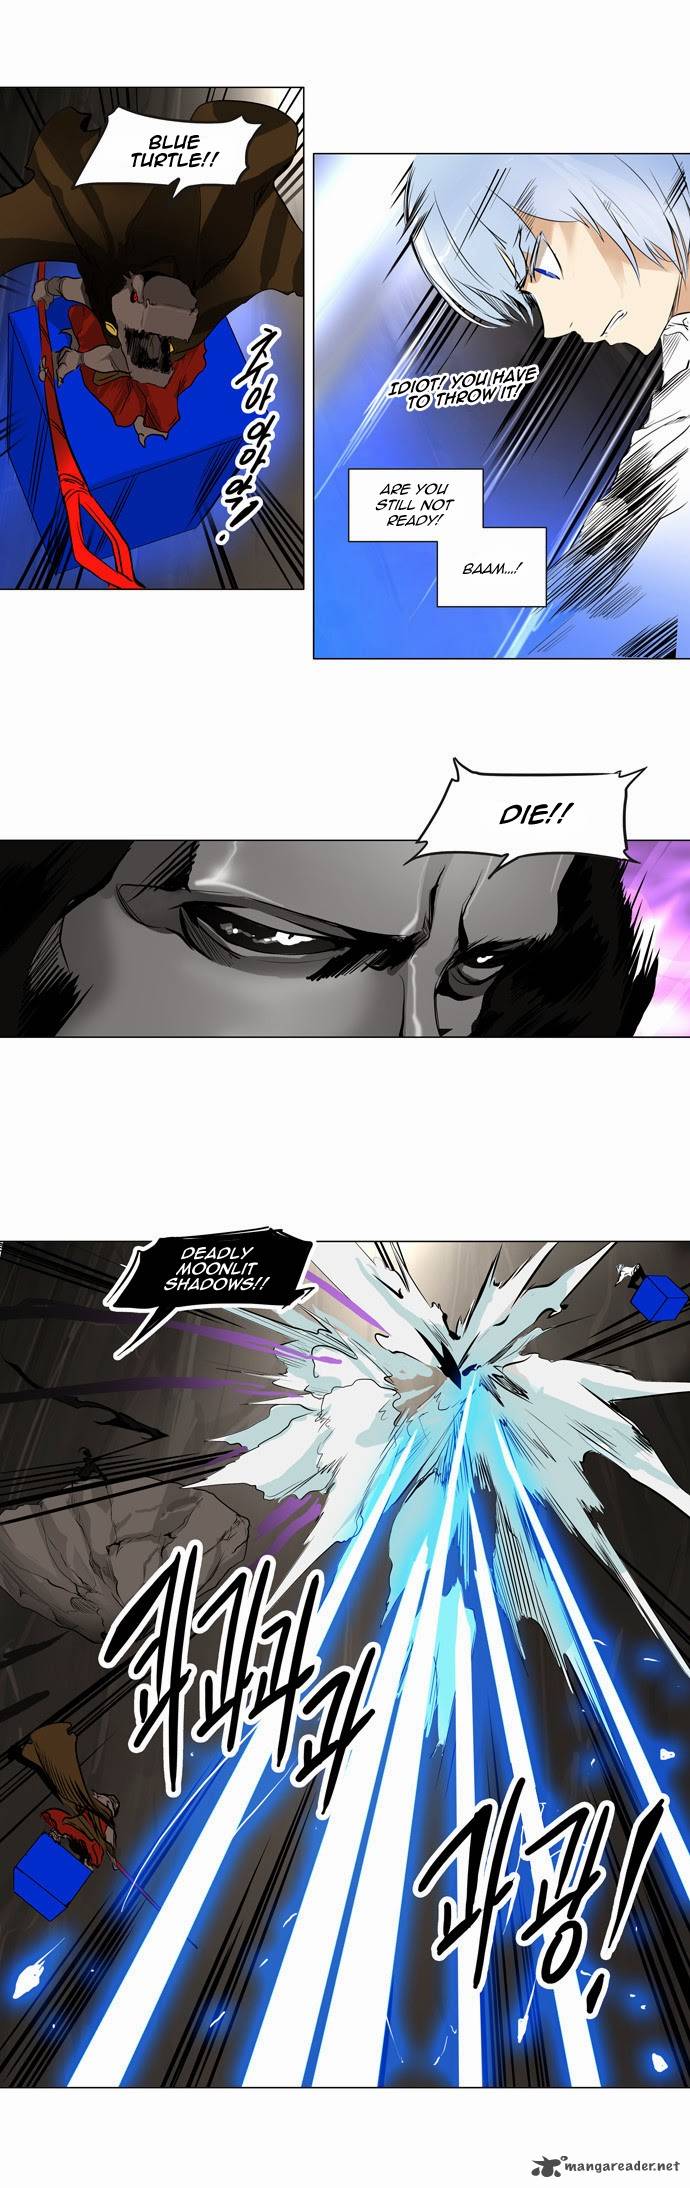 Tower Of God Chapter 183 Page 6